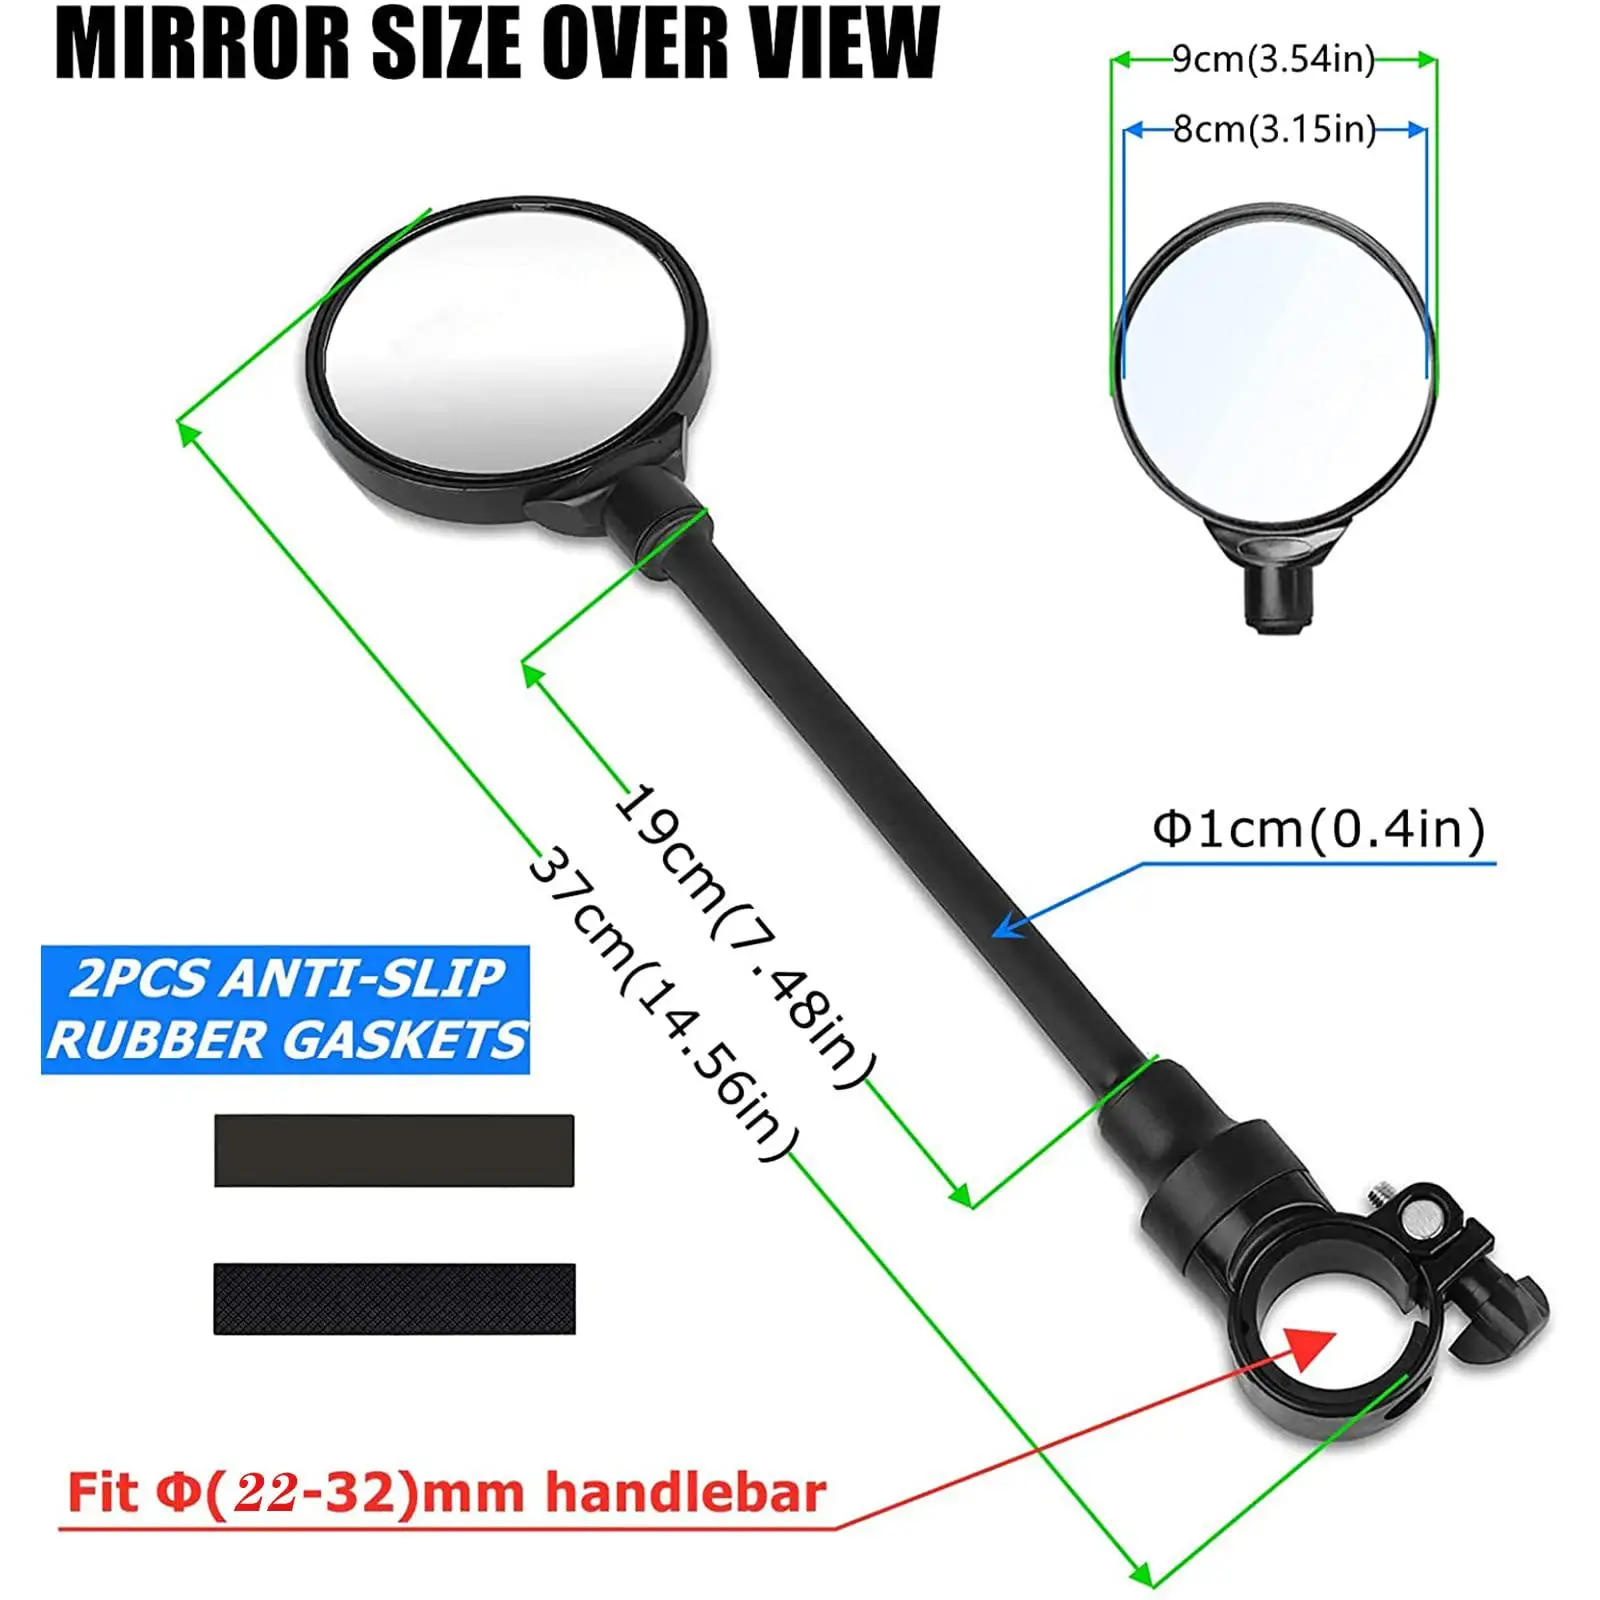 Bike Bicycle Rear View Mirrors Handlebar Mounted Stable Wide Field View° Adjustable